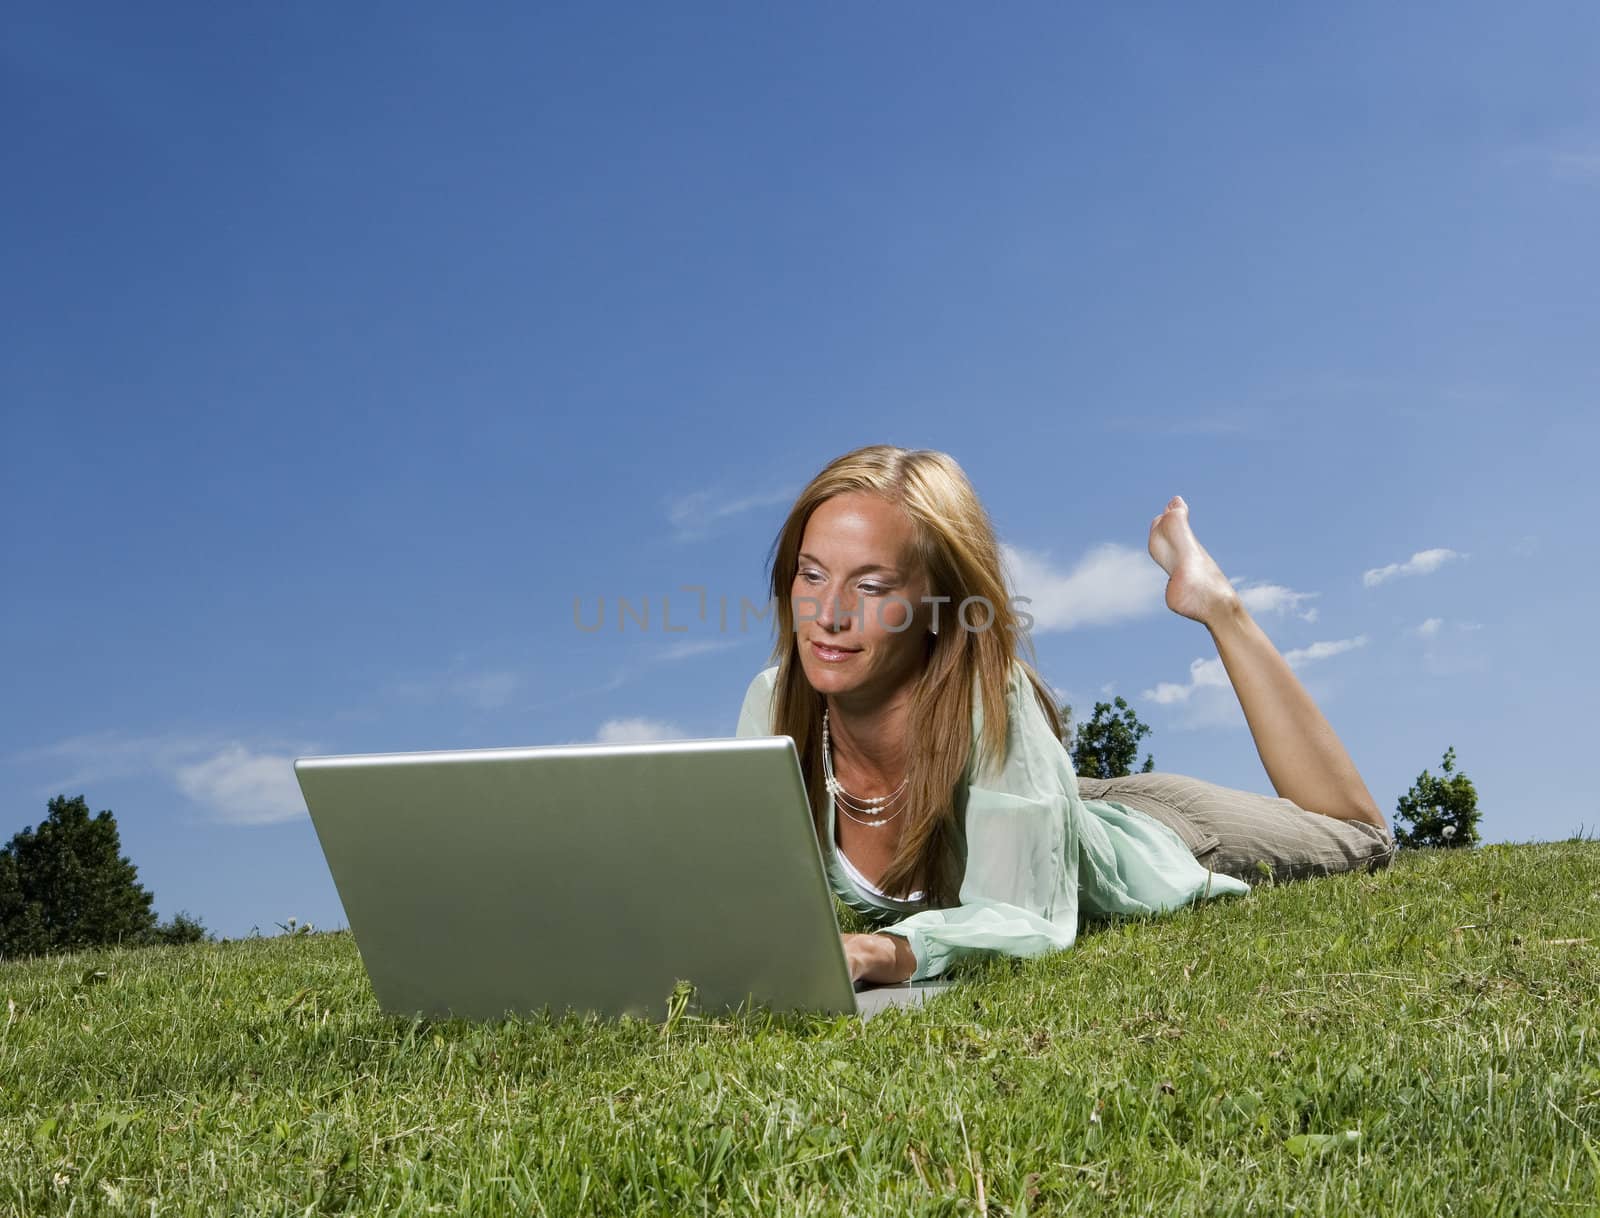 Woman with computer in the grass towards blue sky